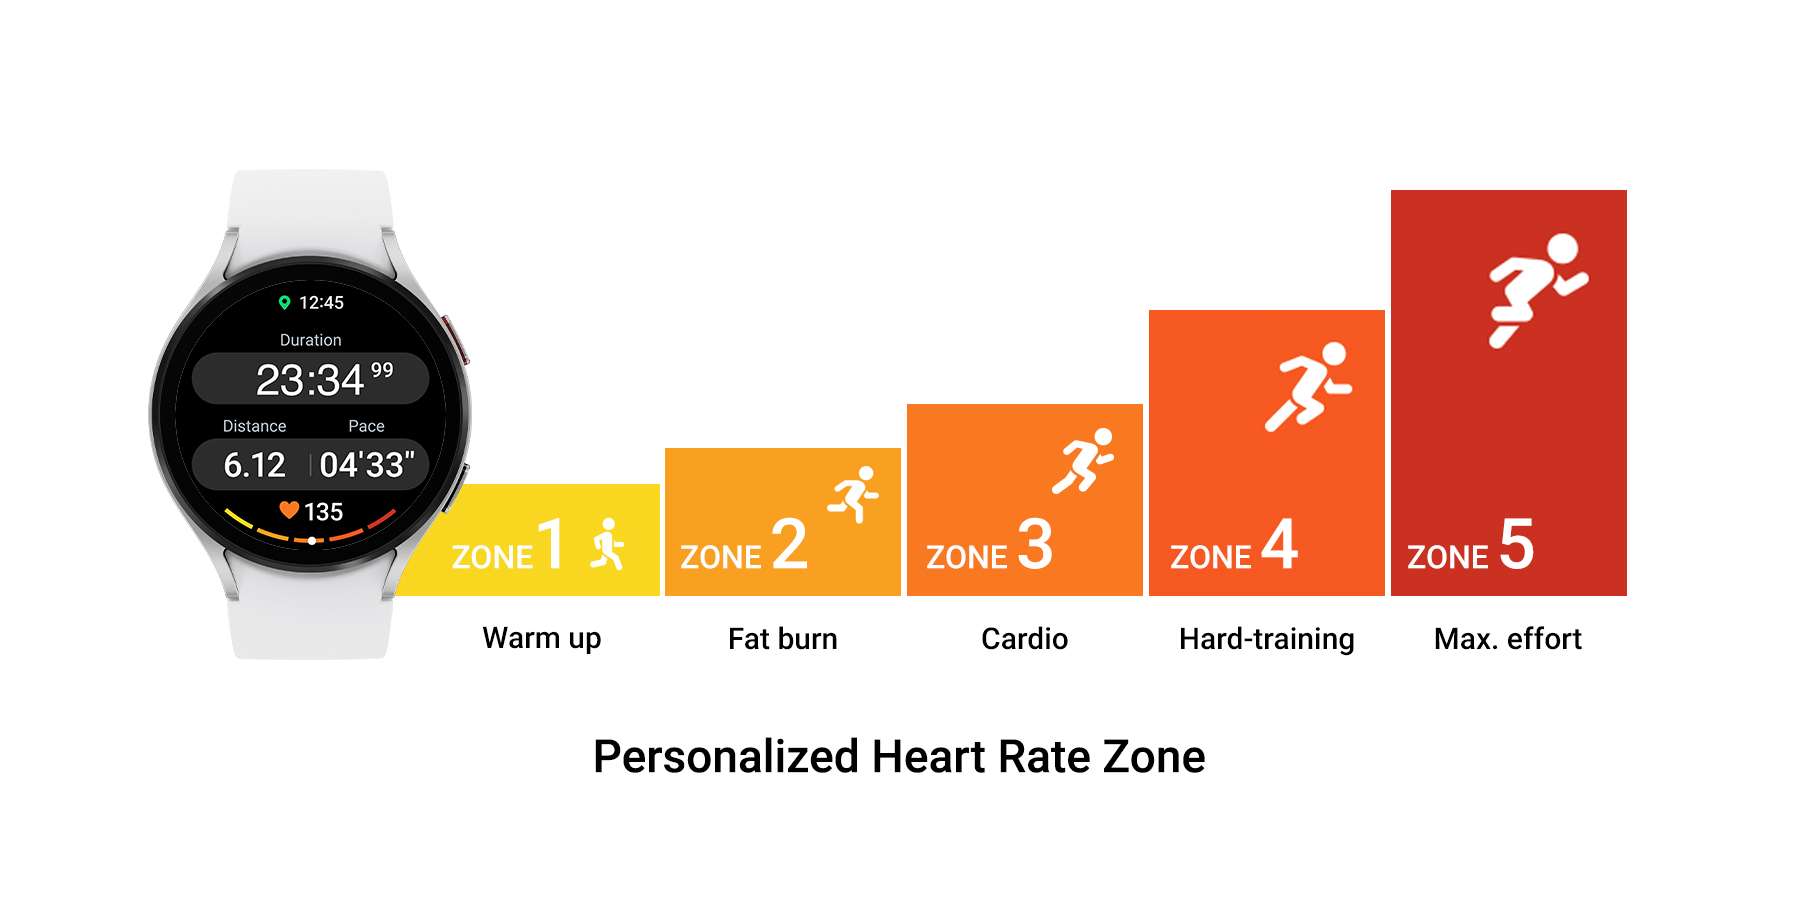 Improved Personalized Heart Rate Zones